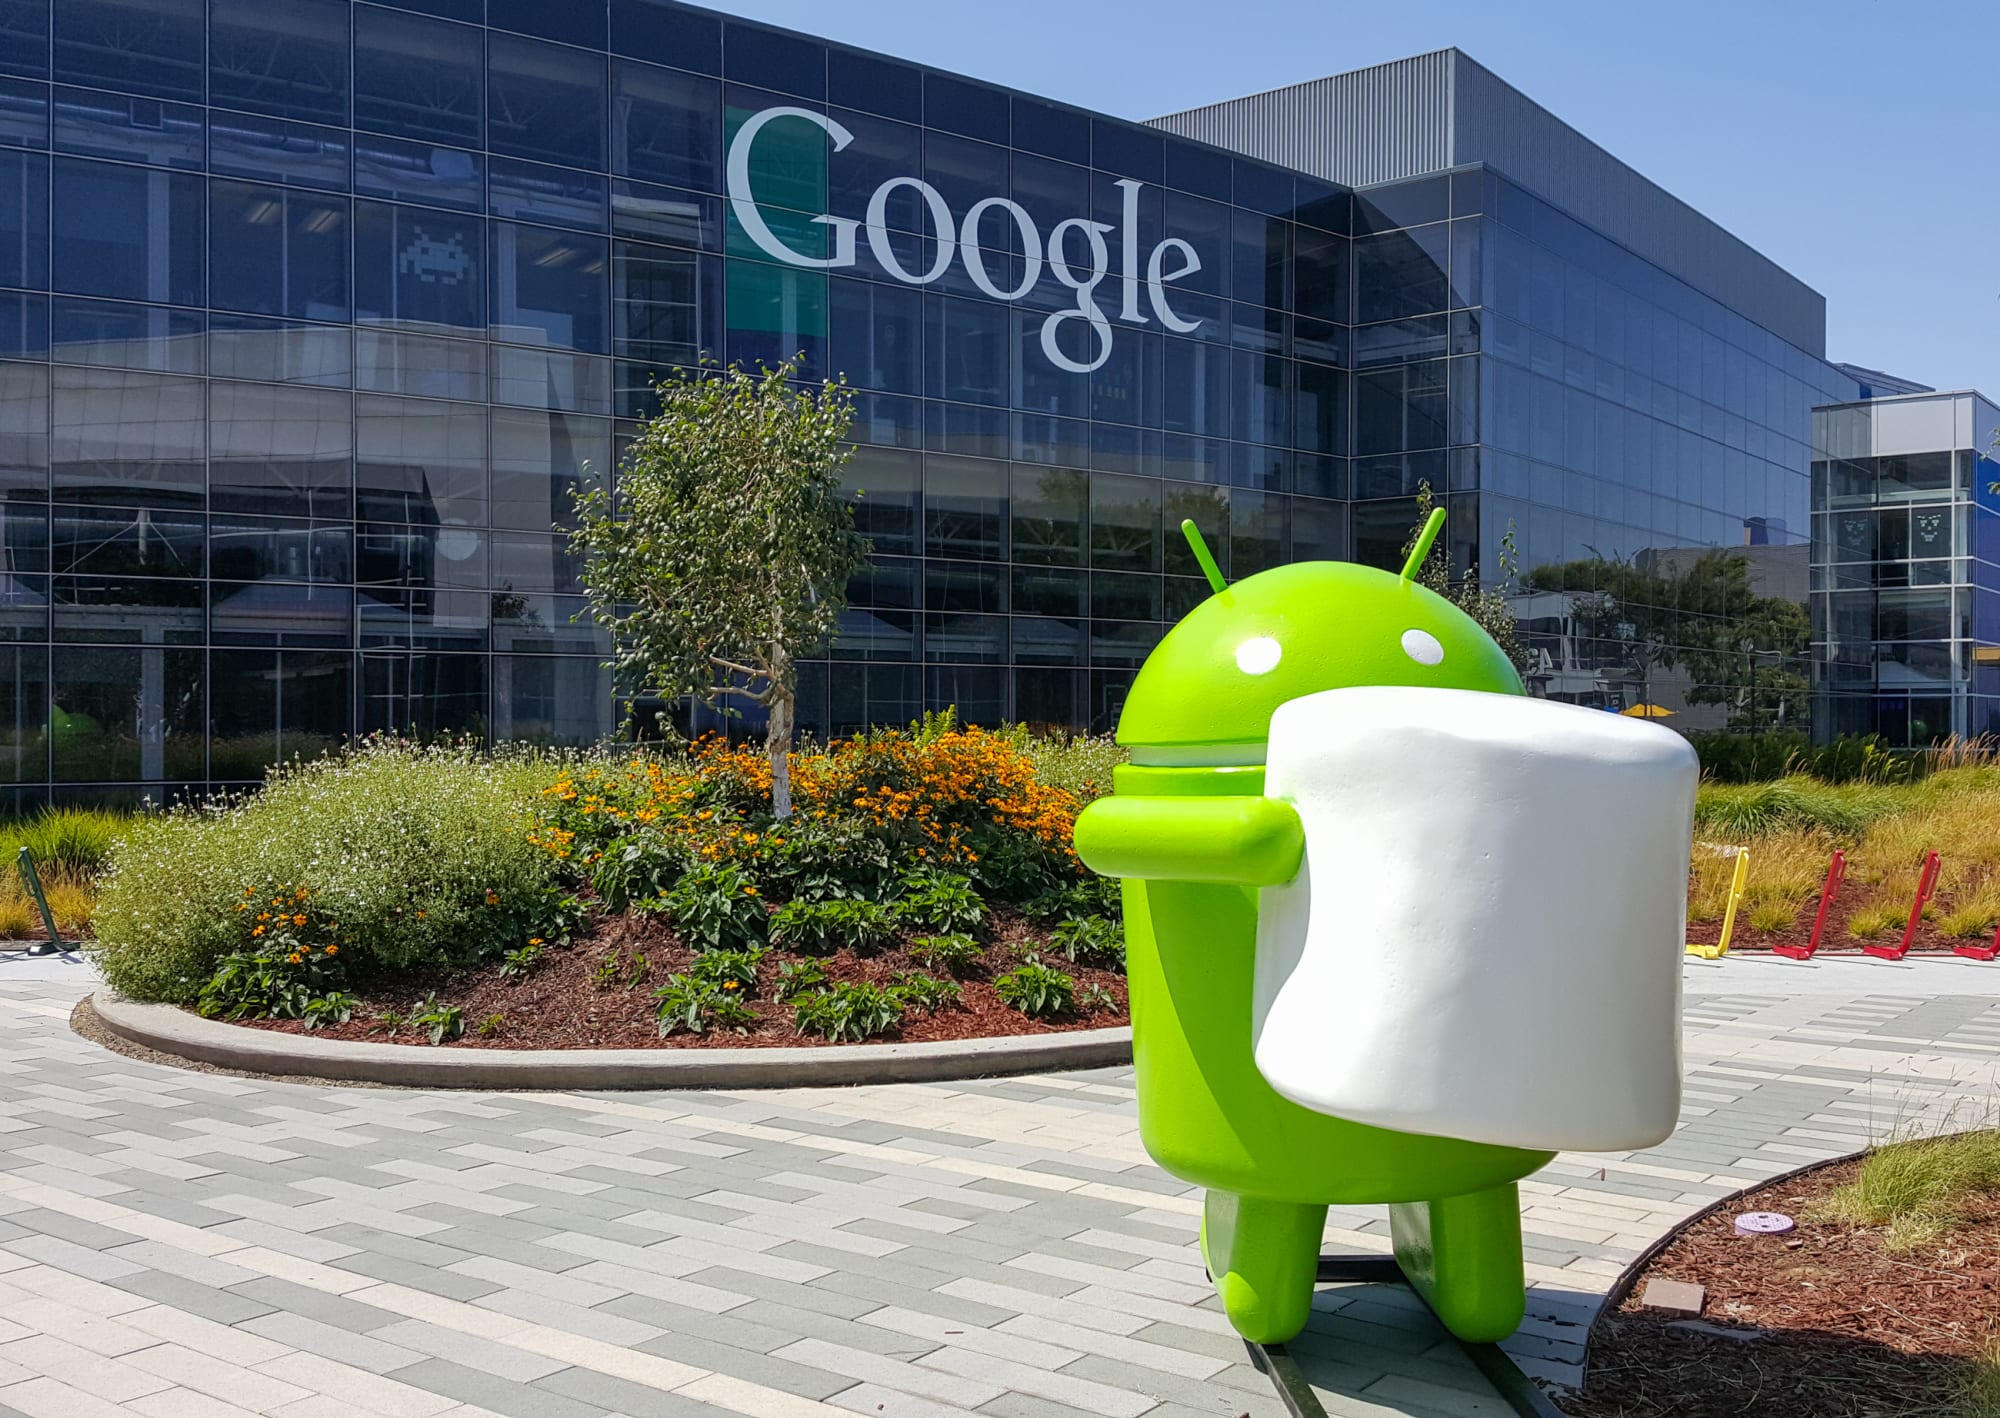 Exterior view of Google office with Android Marshmallow